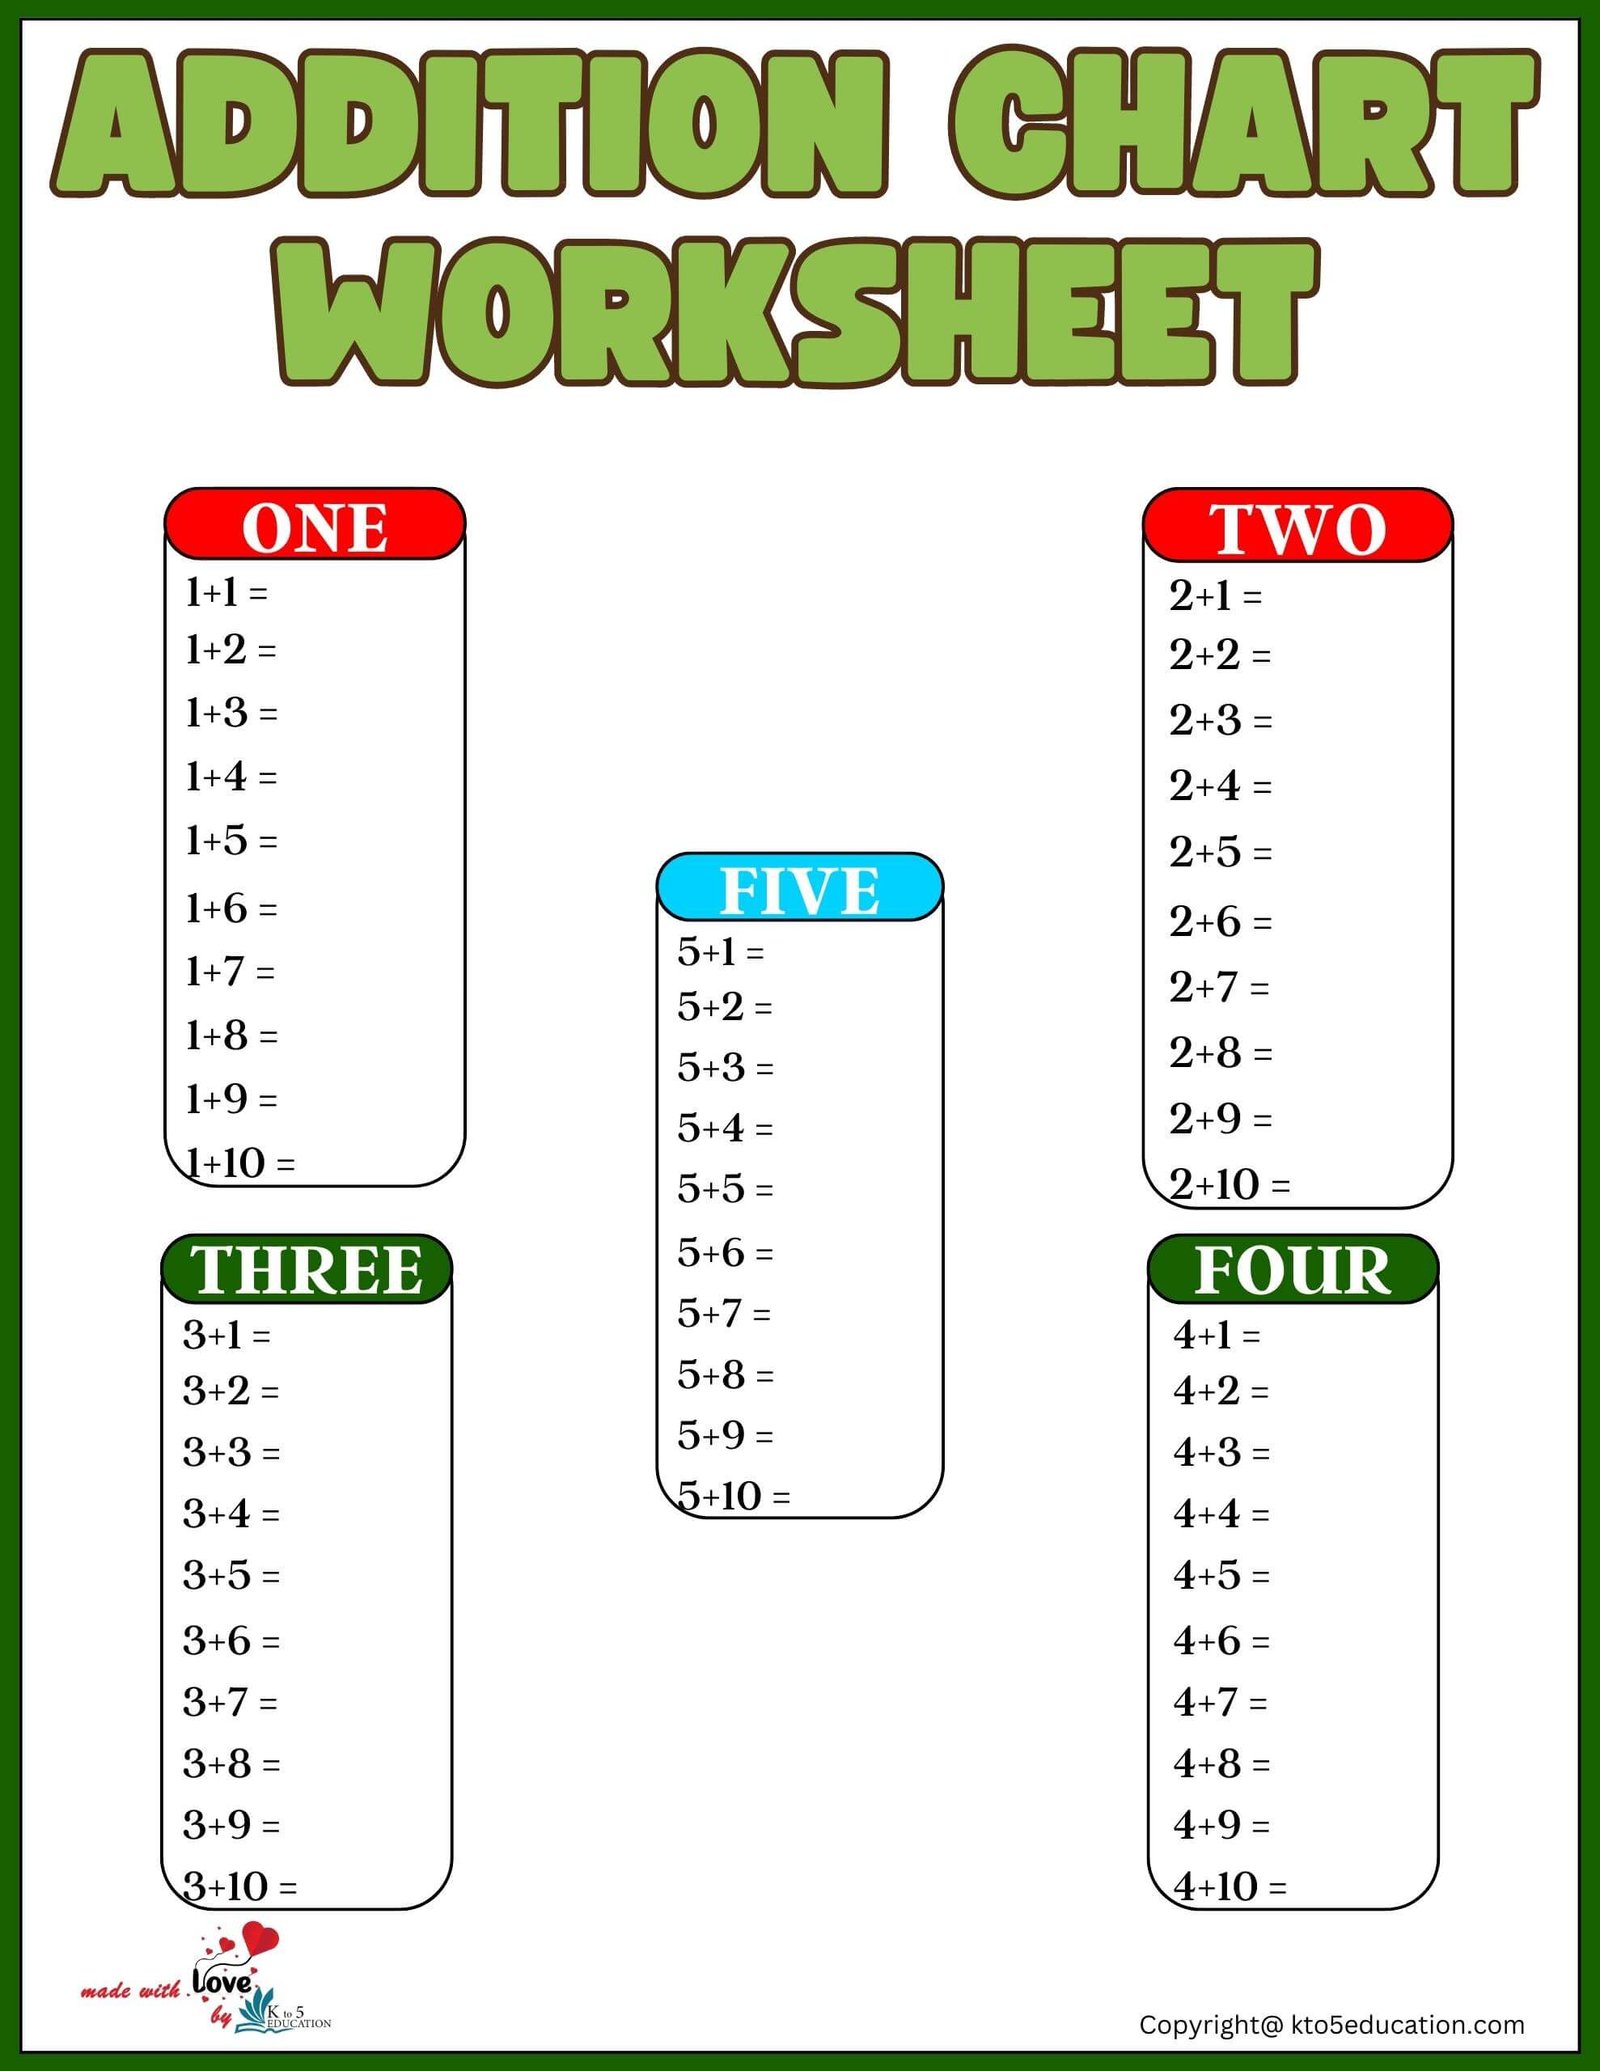 Addition Chart Worksheets